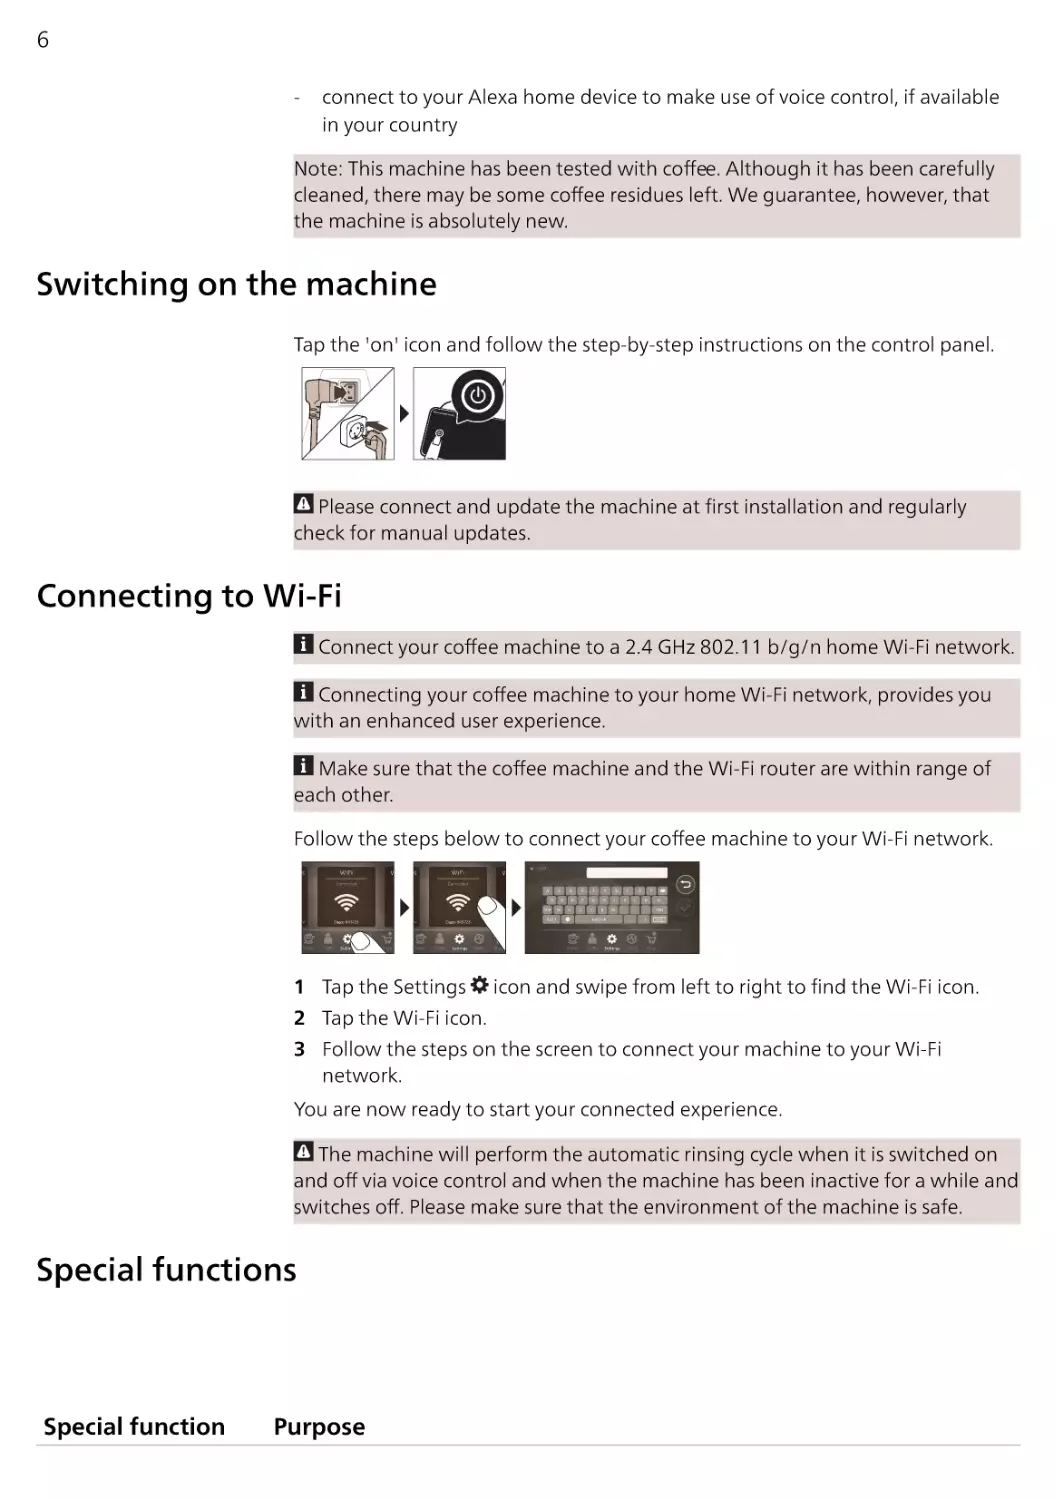 Switching on the machine
Connecting to Wi-Fi
Special functions